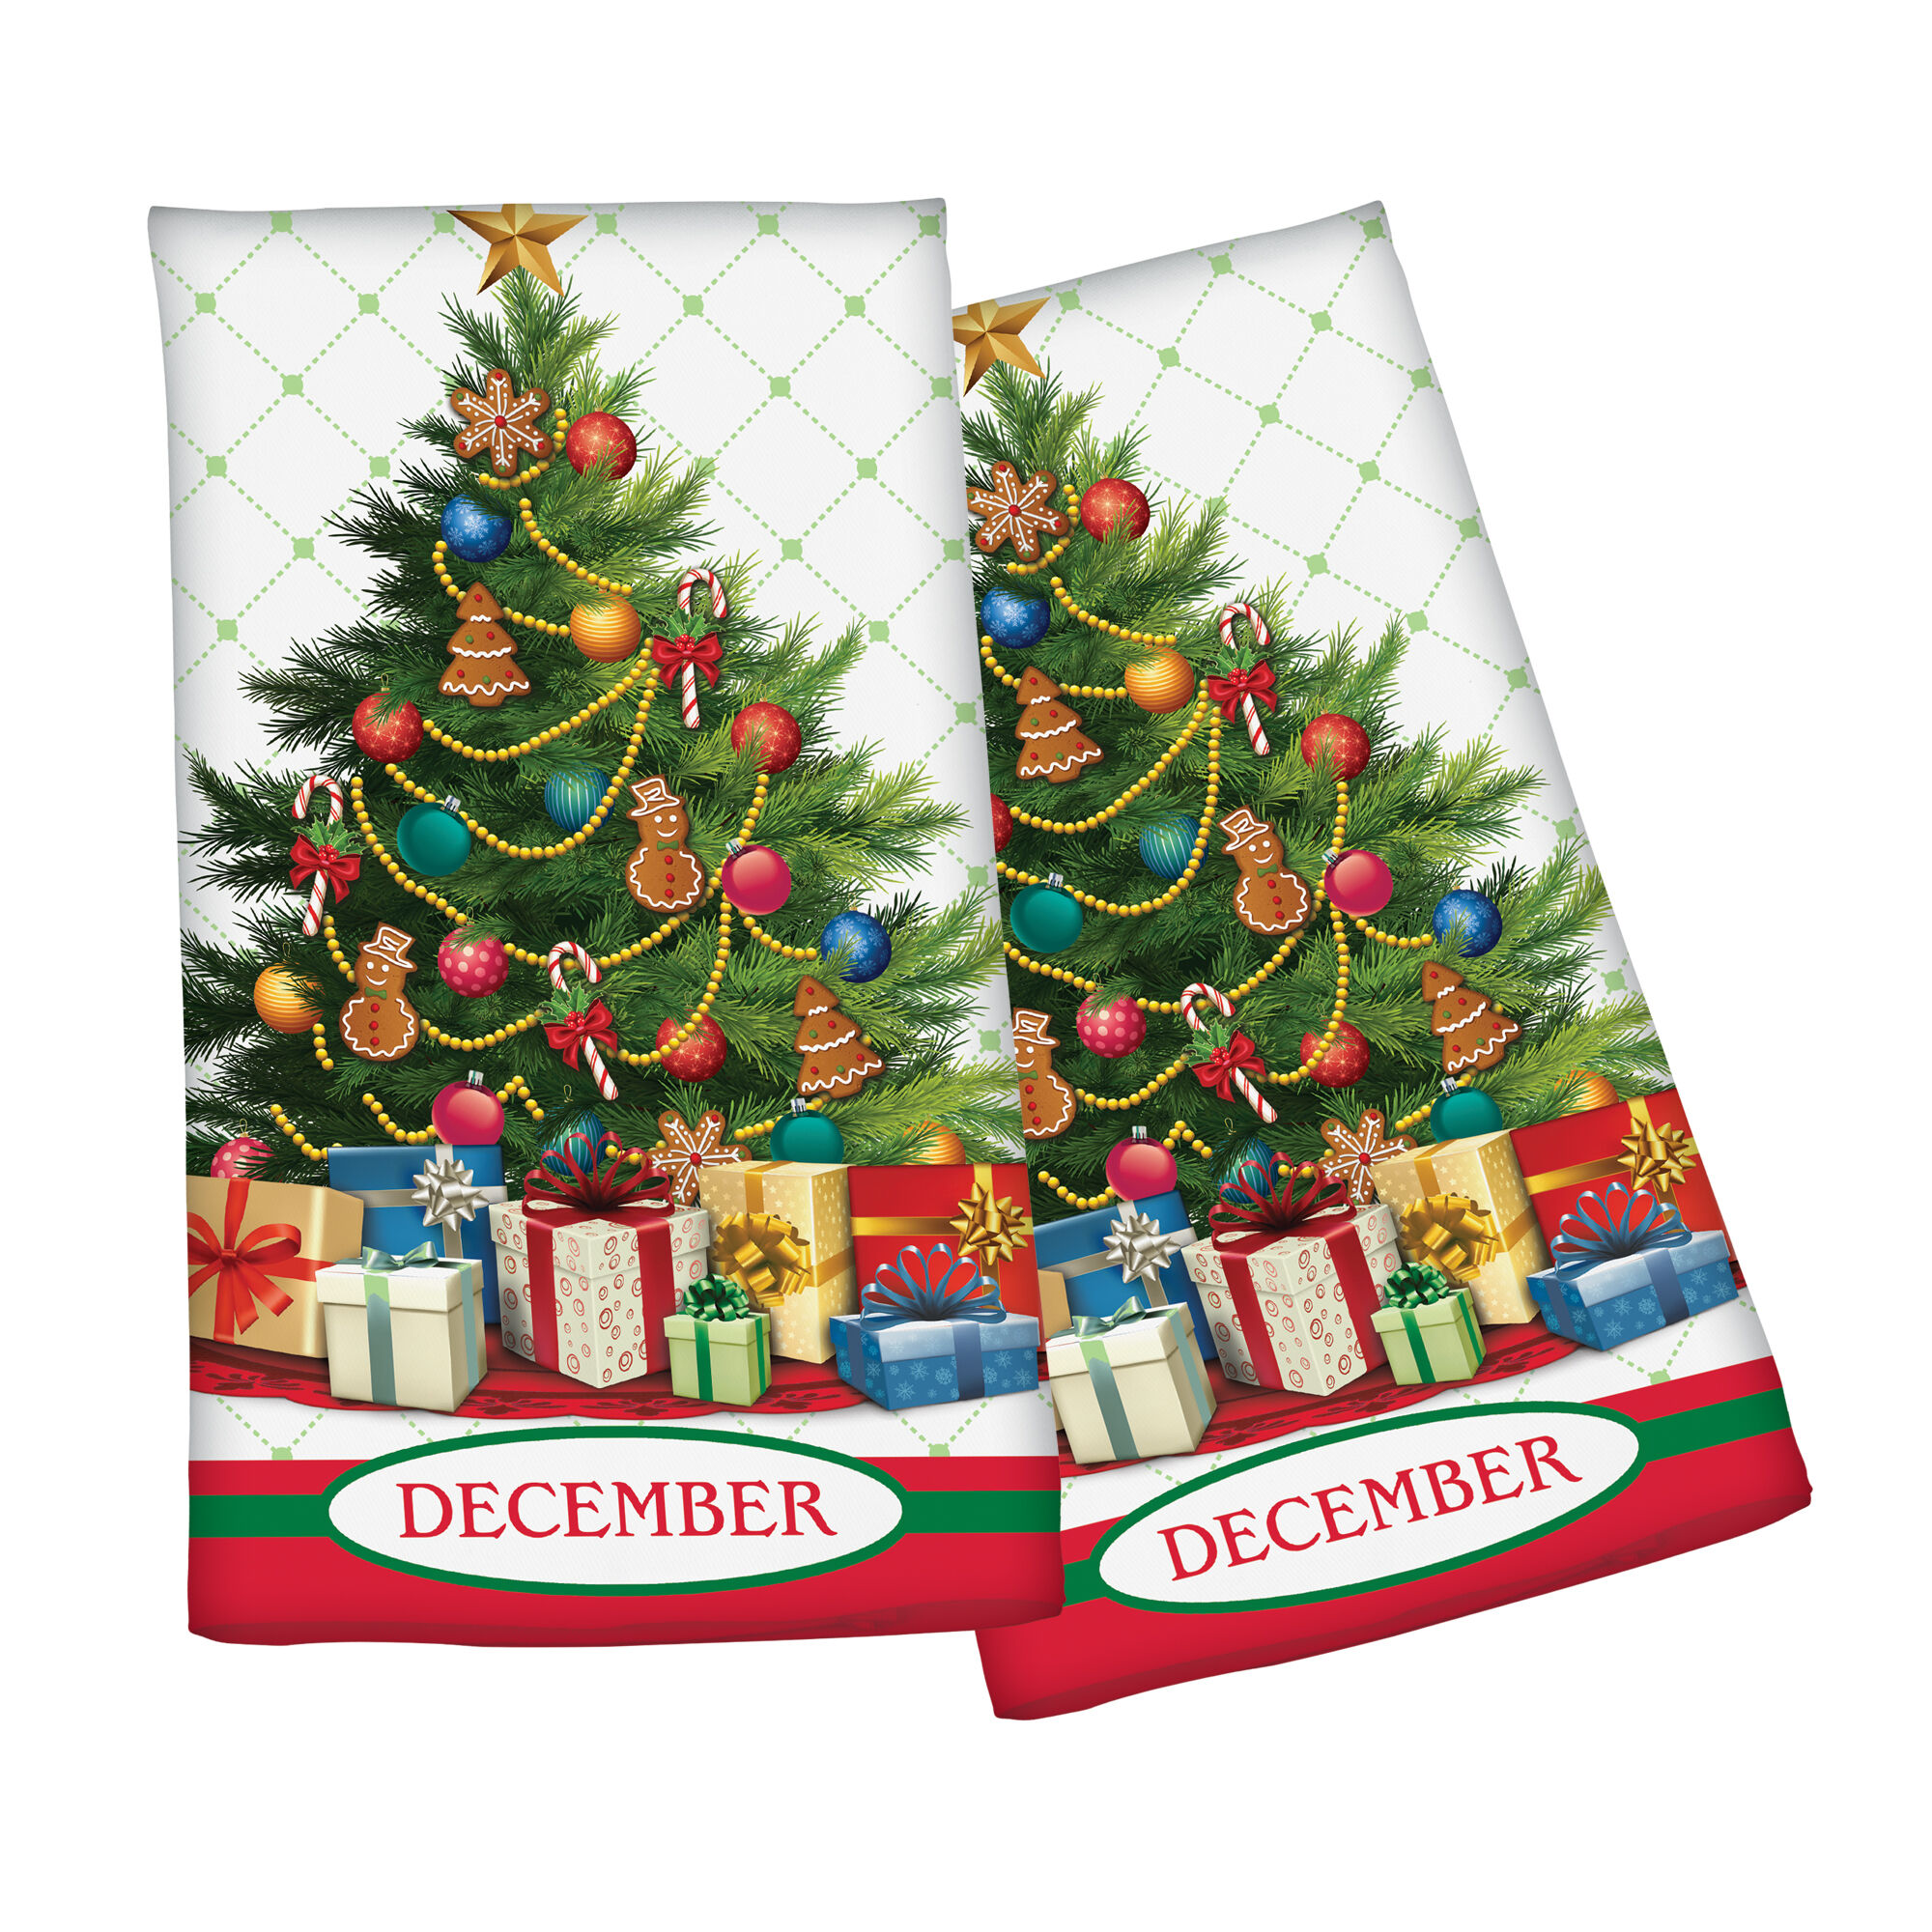 Year of Cheer Kitchen Towel Collection 6844 0015 h december